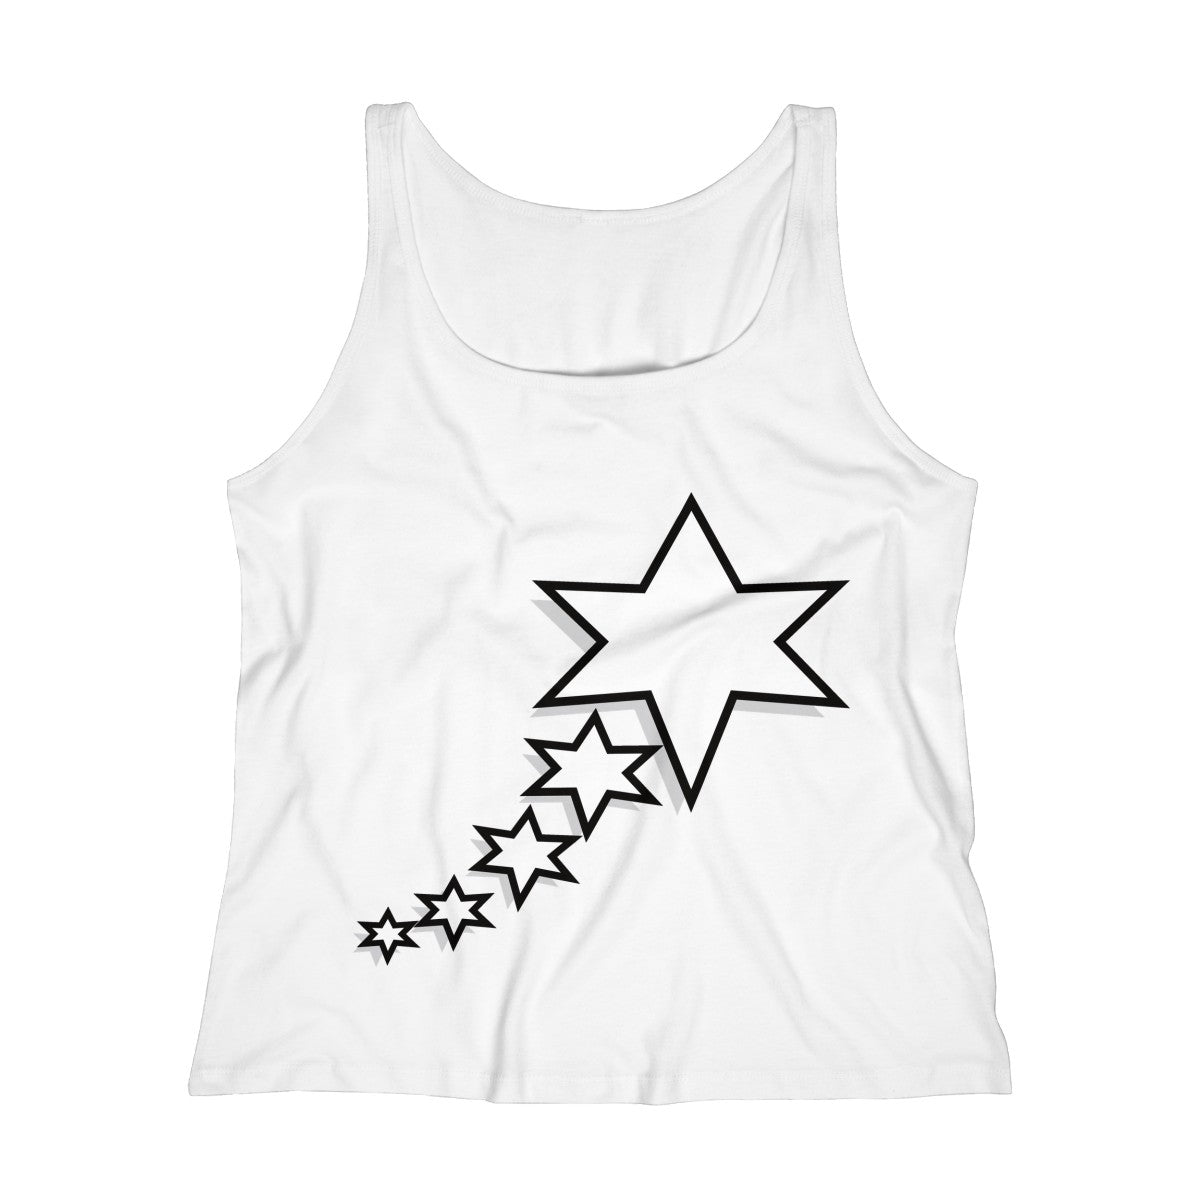 Women's Relaxed Jersey Tank Top - 6 Points 5 Stars (White)